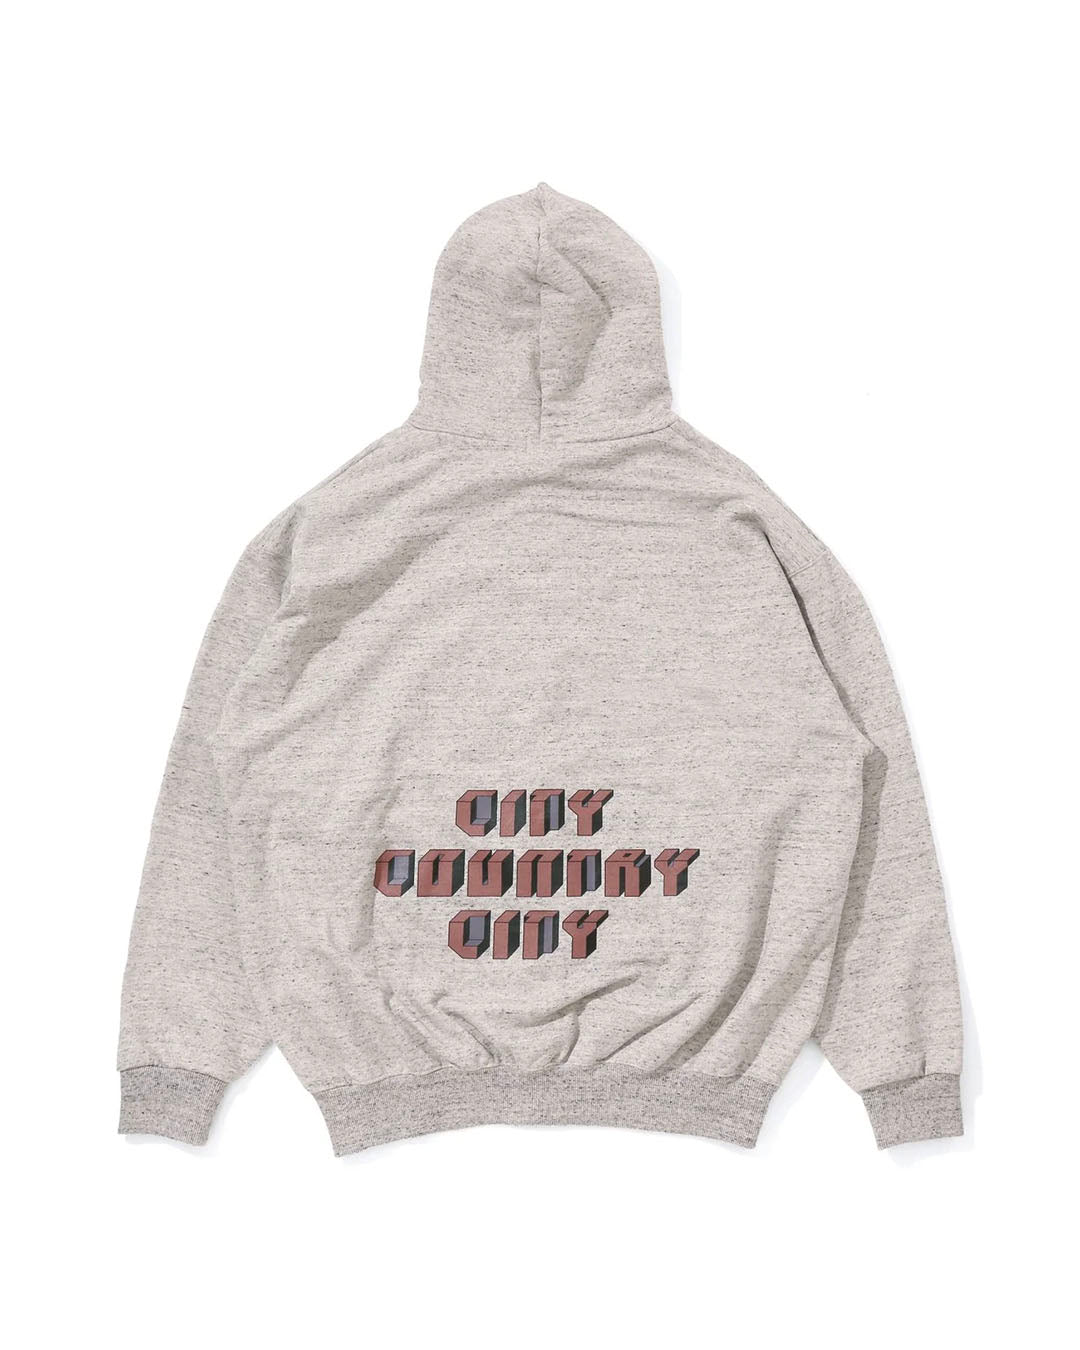 [CITY COUNTRY CITY] EMBROIDERED LOGO ZIP UP COTTON HOODIE - AH GRAY